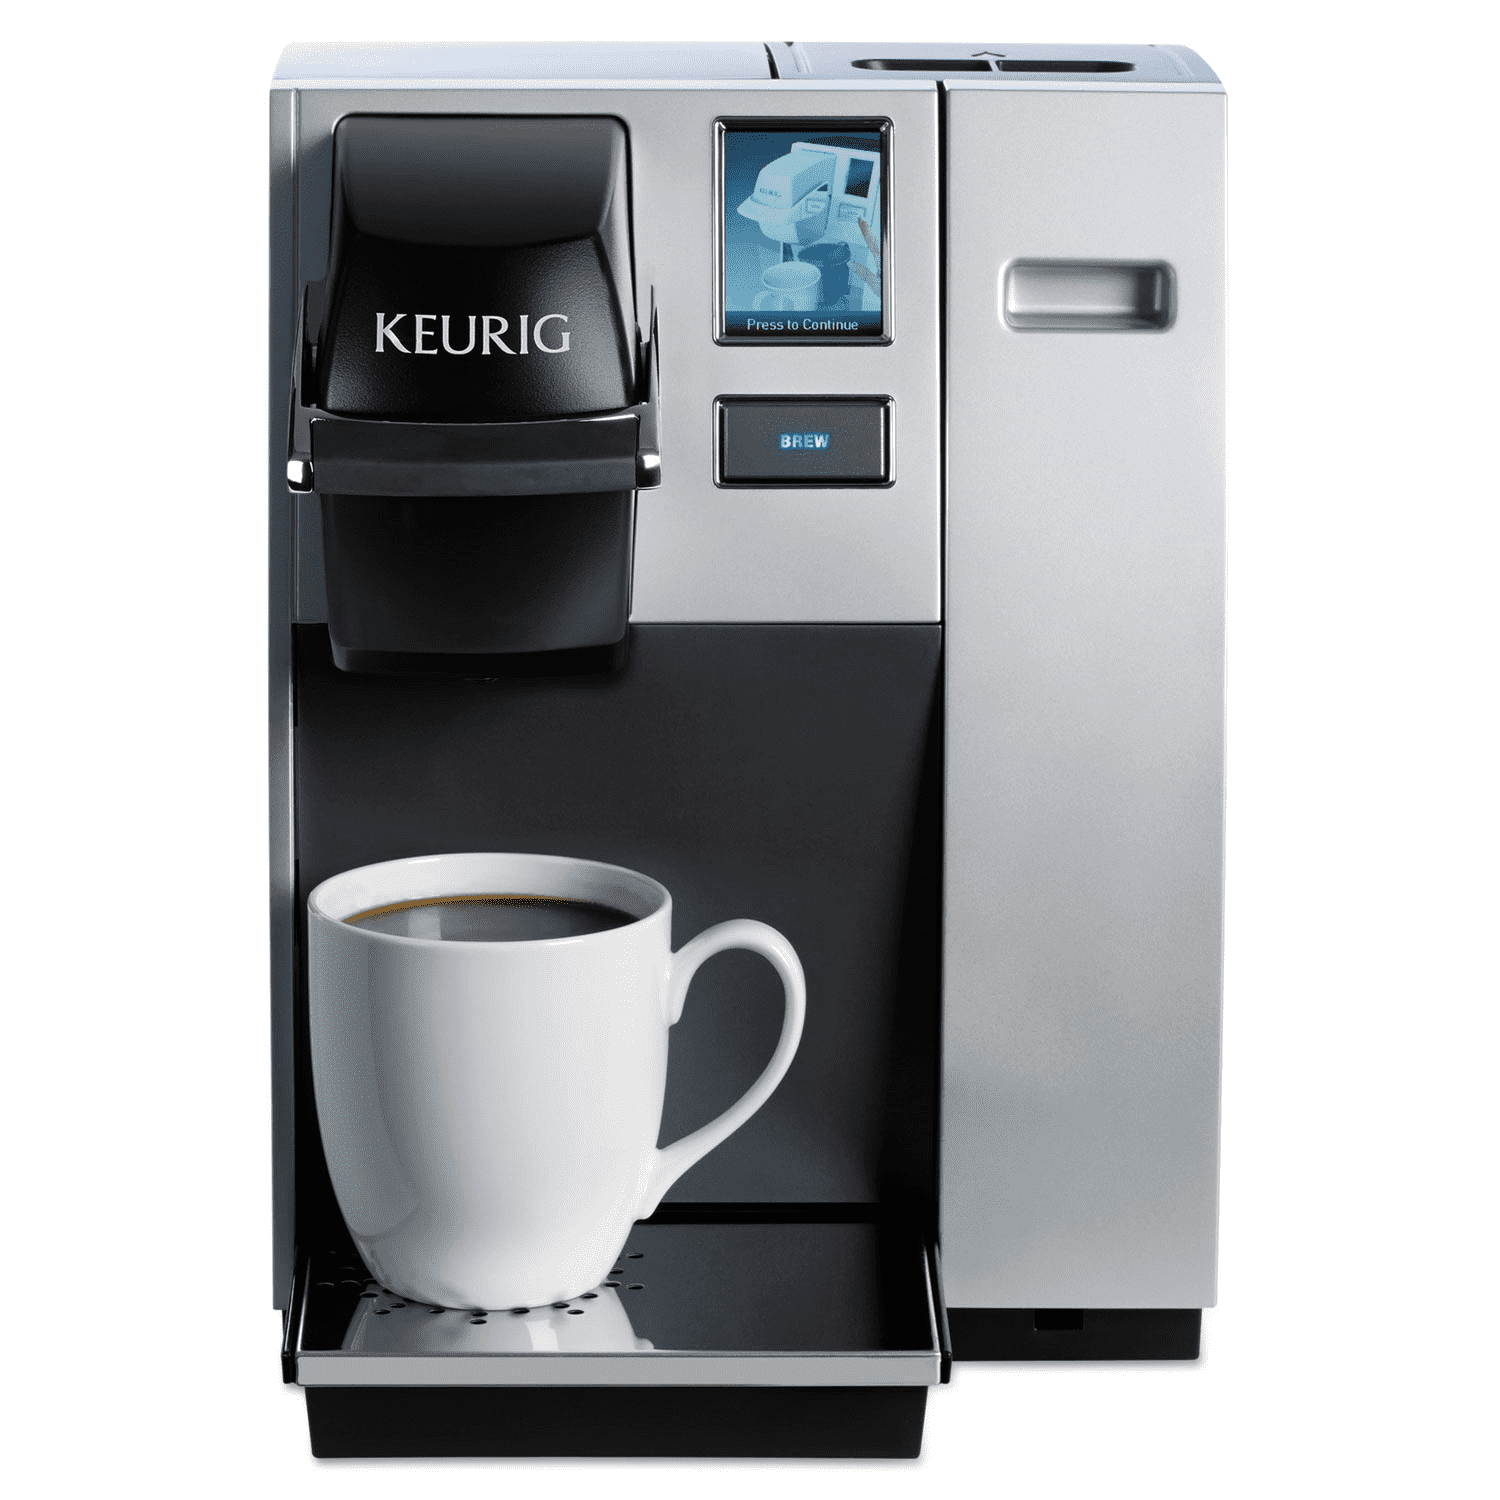 Keurig 150 P small office brewer